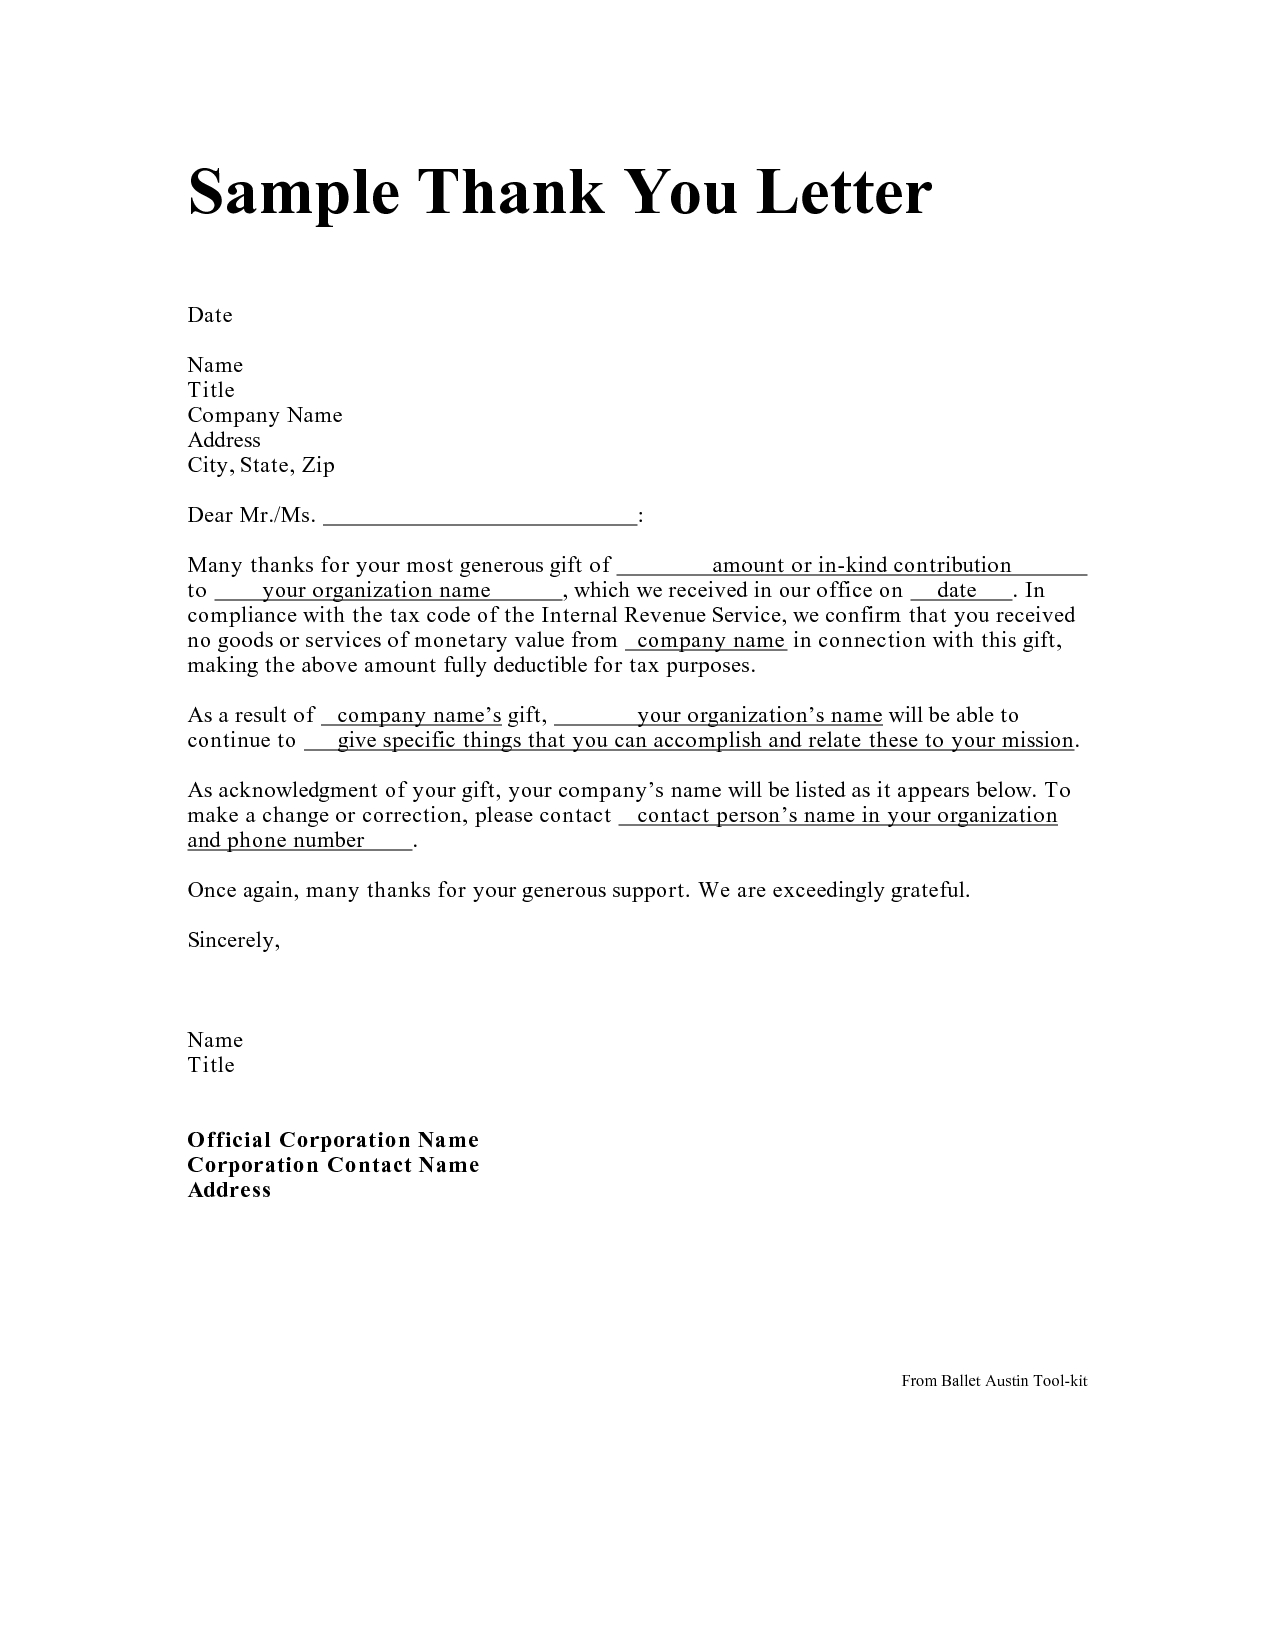 Golf tournament Thank You Letter Template - Personal Thank You Letter Personal Thank You Letter Samples